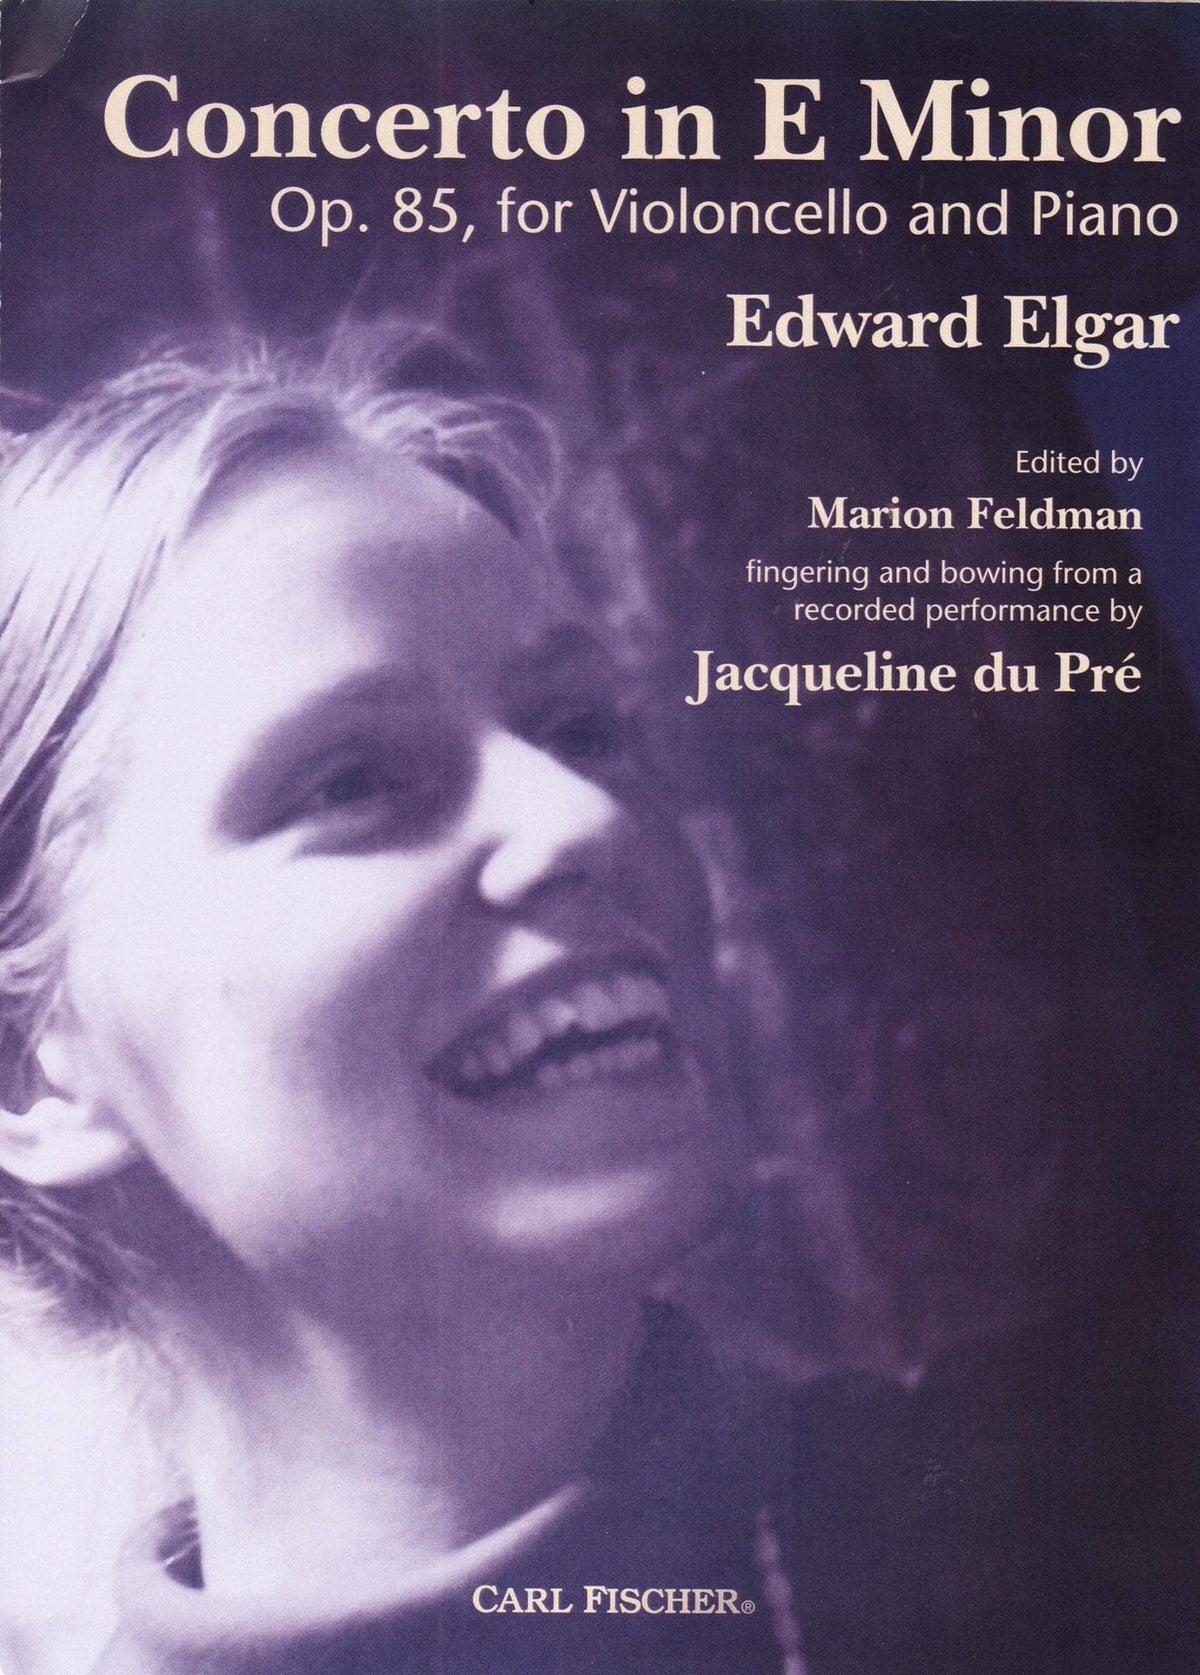 Elgar, Edward - Concerto in E Minor, Opus 85 - for Cello and Piano - Edition based on a Jacqueline du Pré performance - Carl Fischer